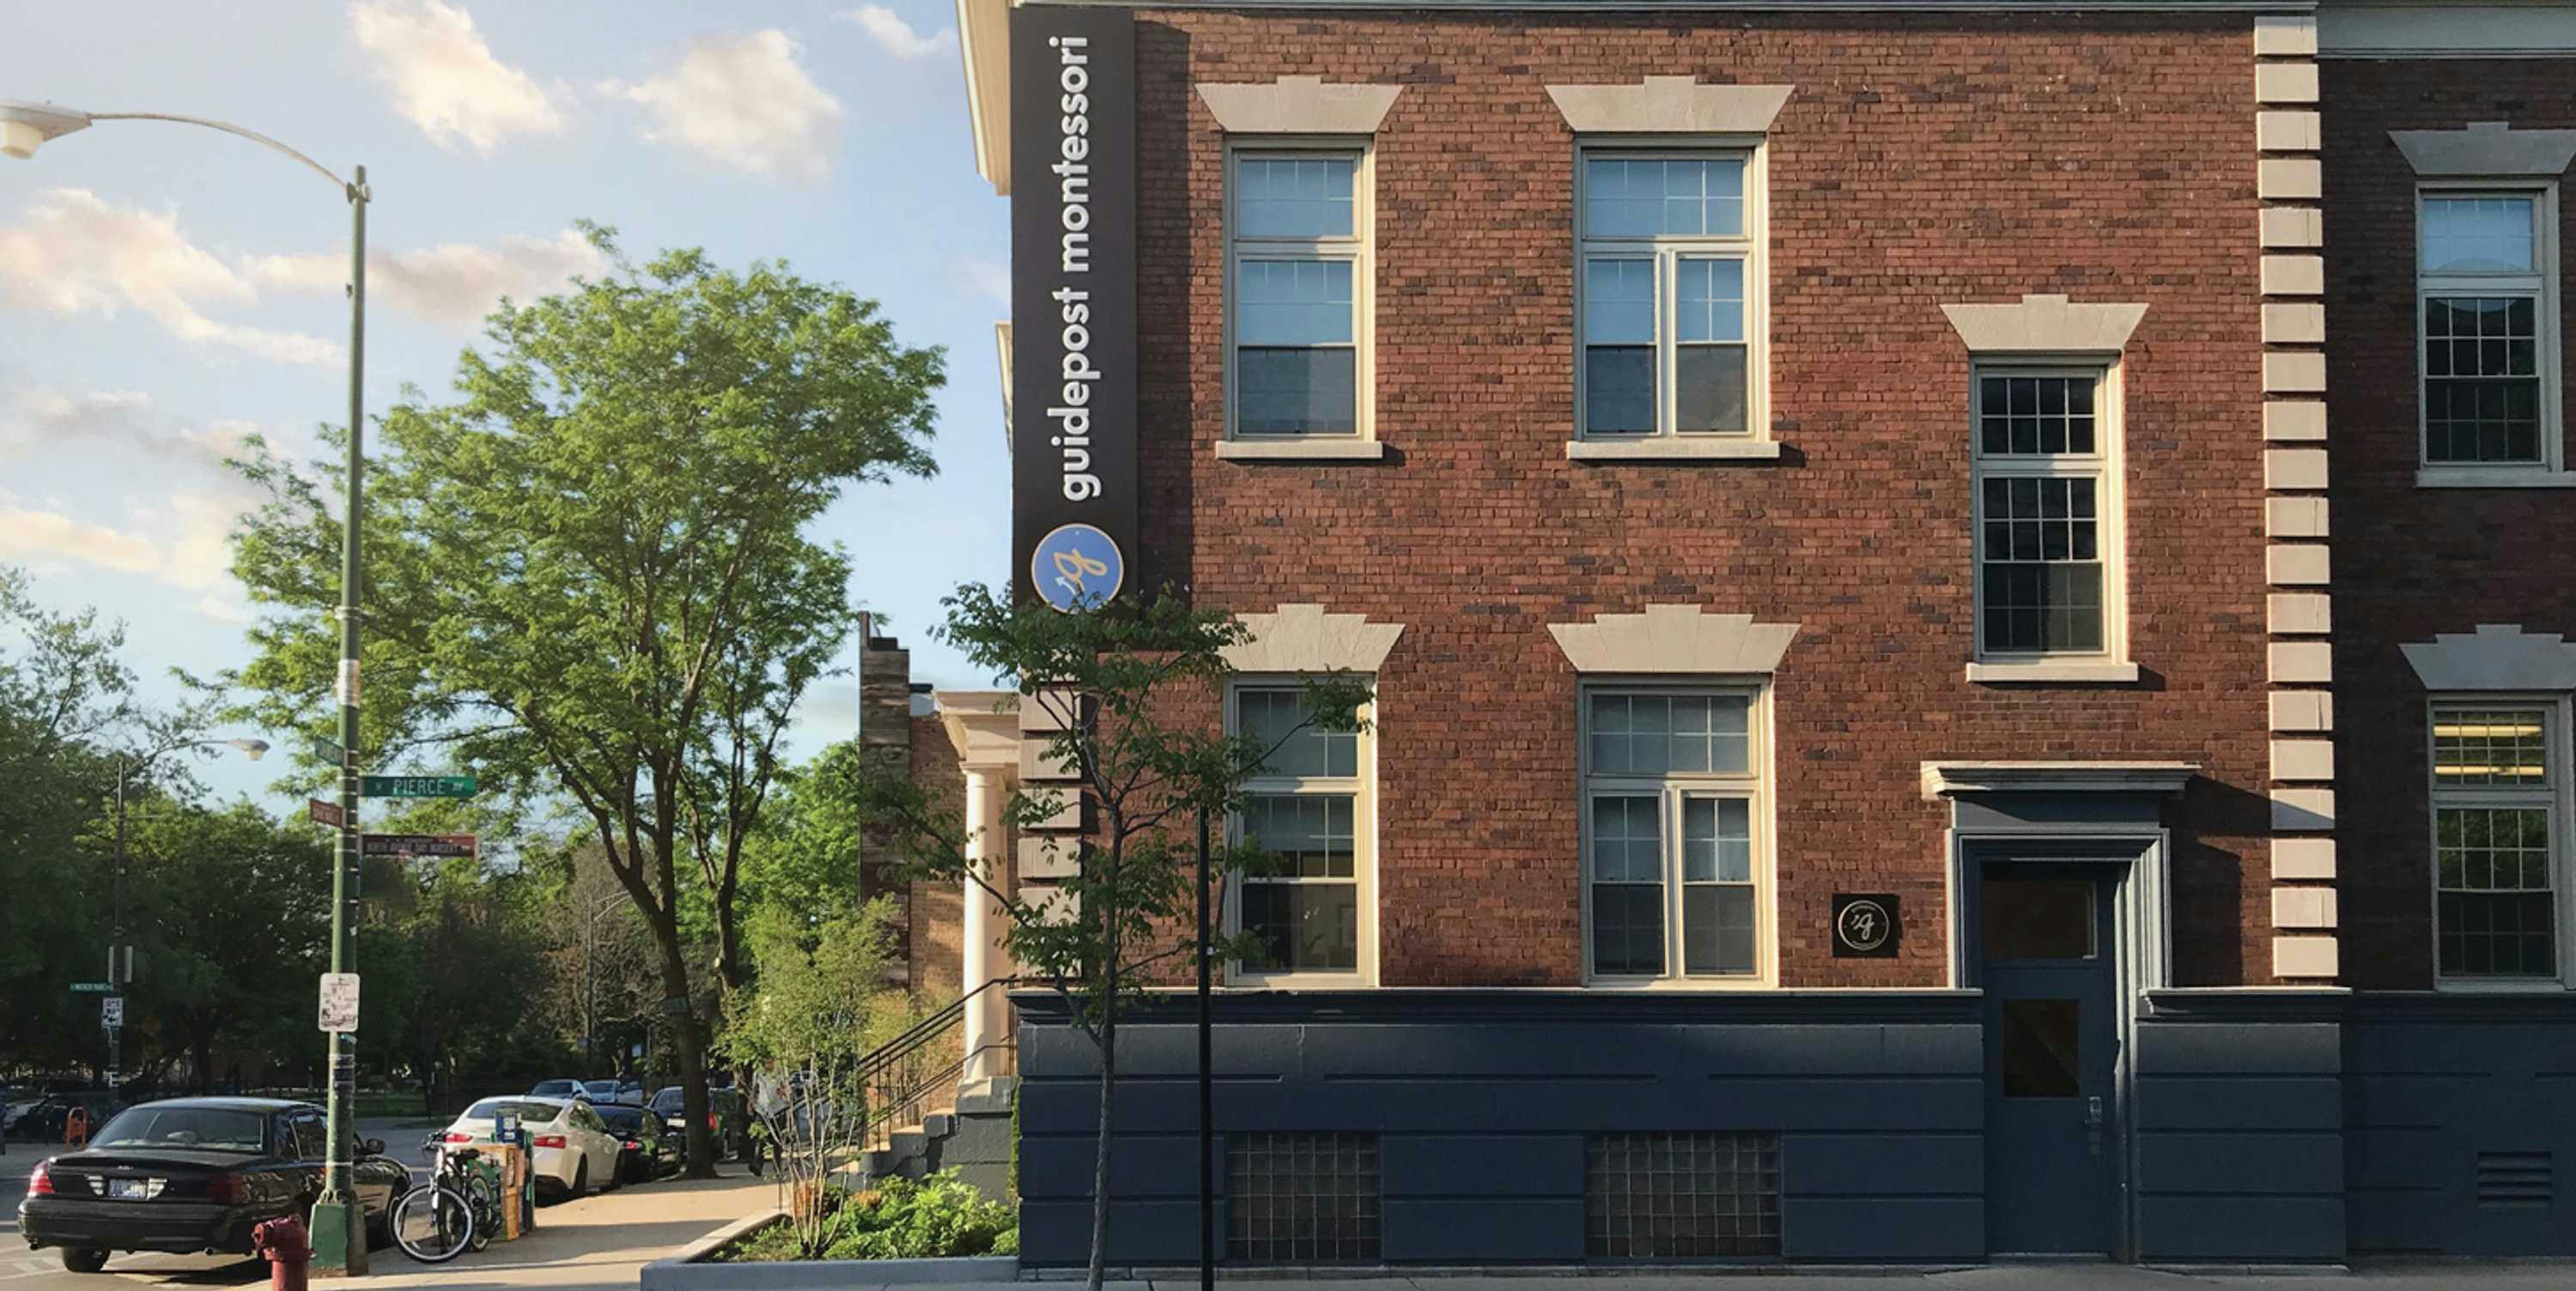 street-facing view of Guidepost Montessori at Wicker Park school building with Guidepost Montessori branded sign on brick façade